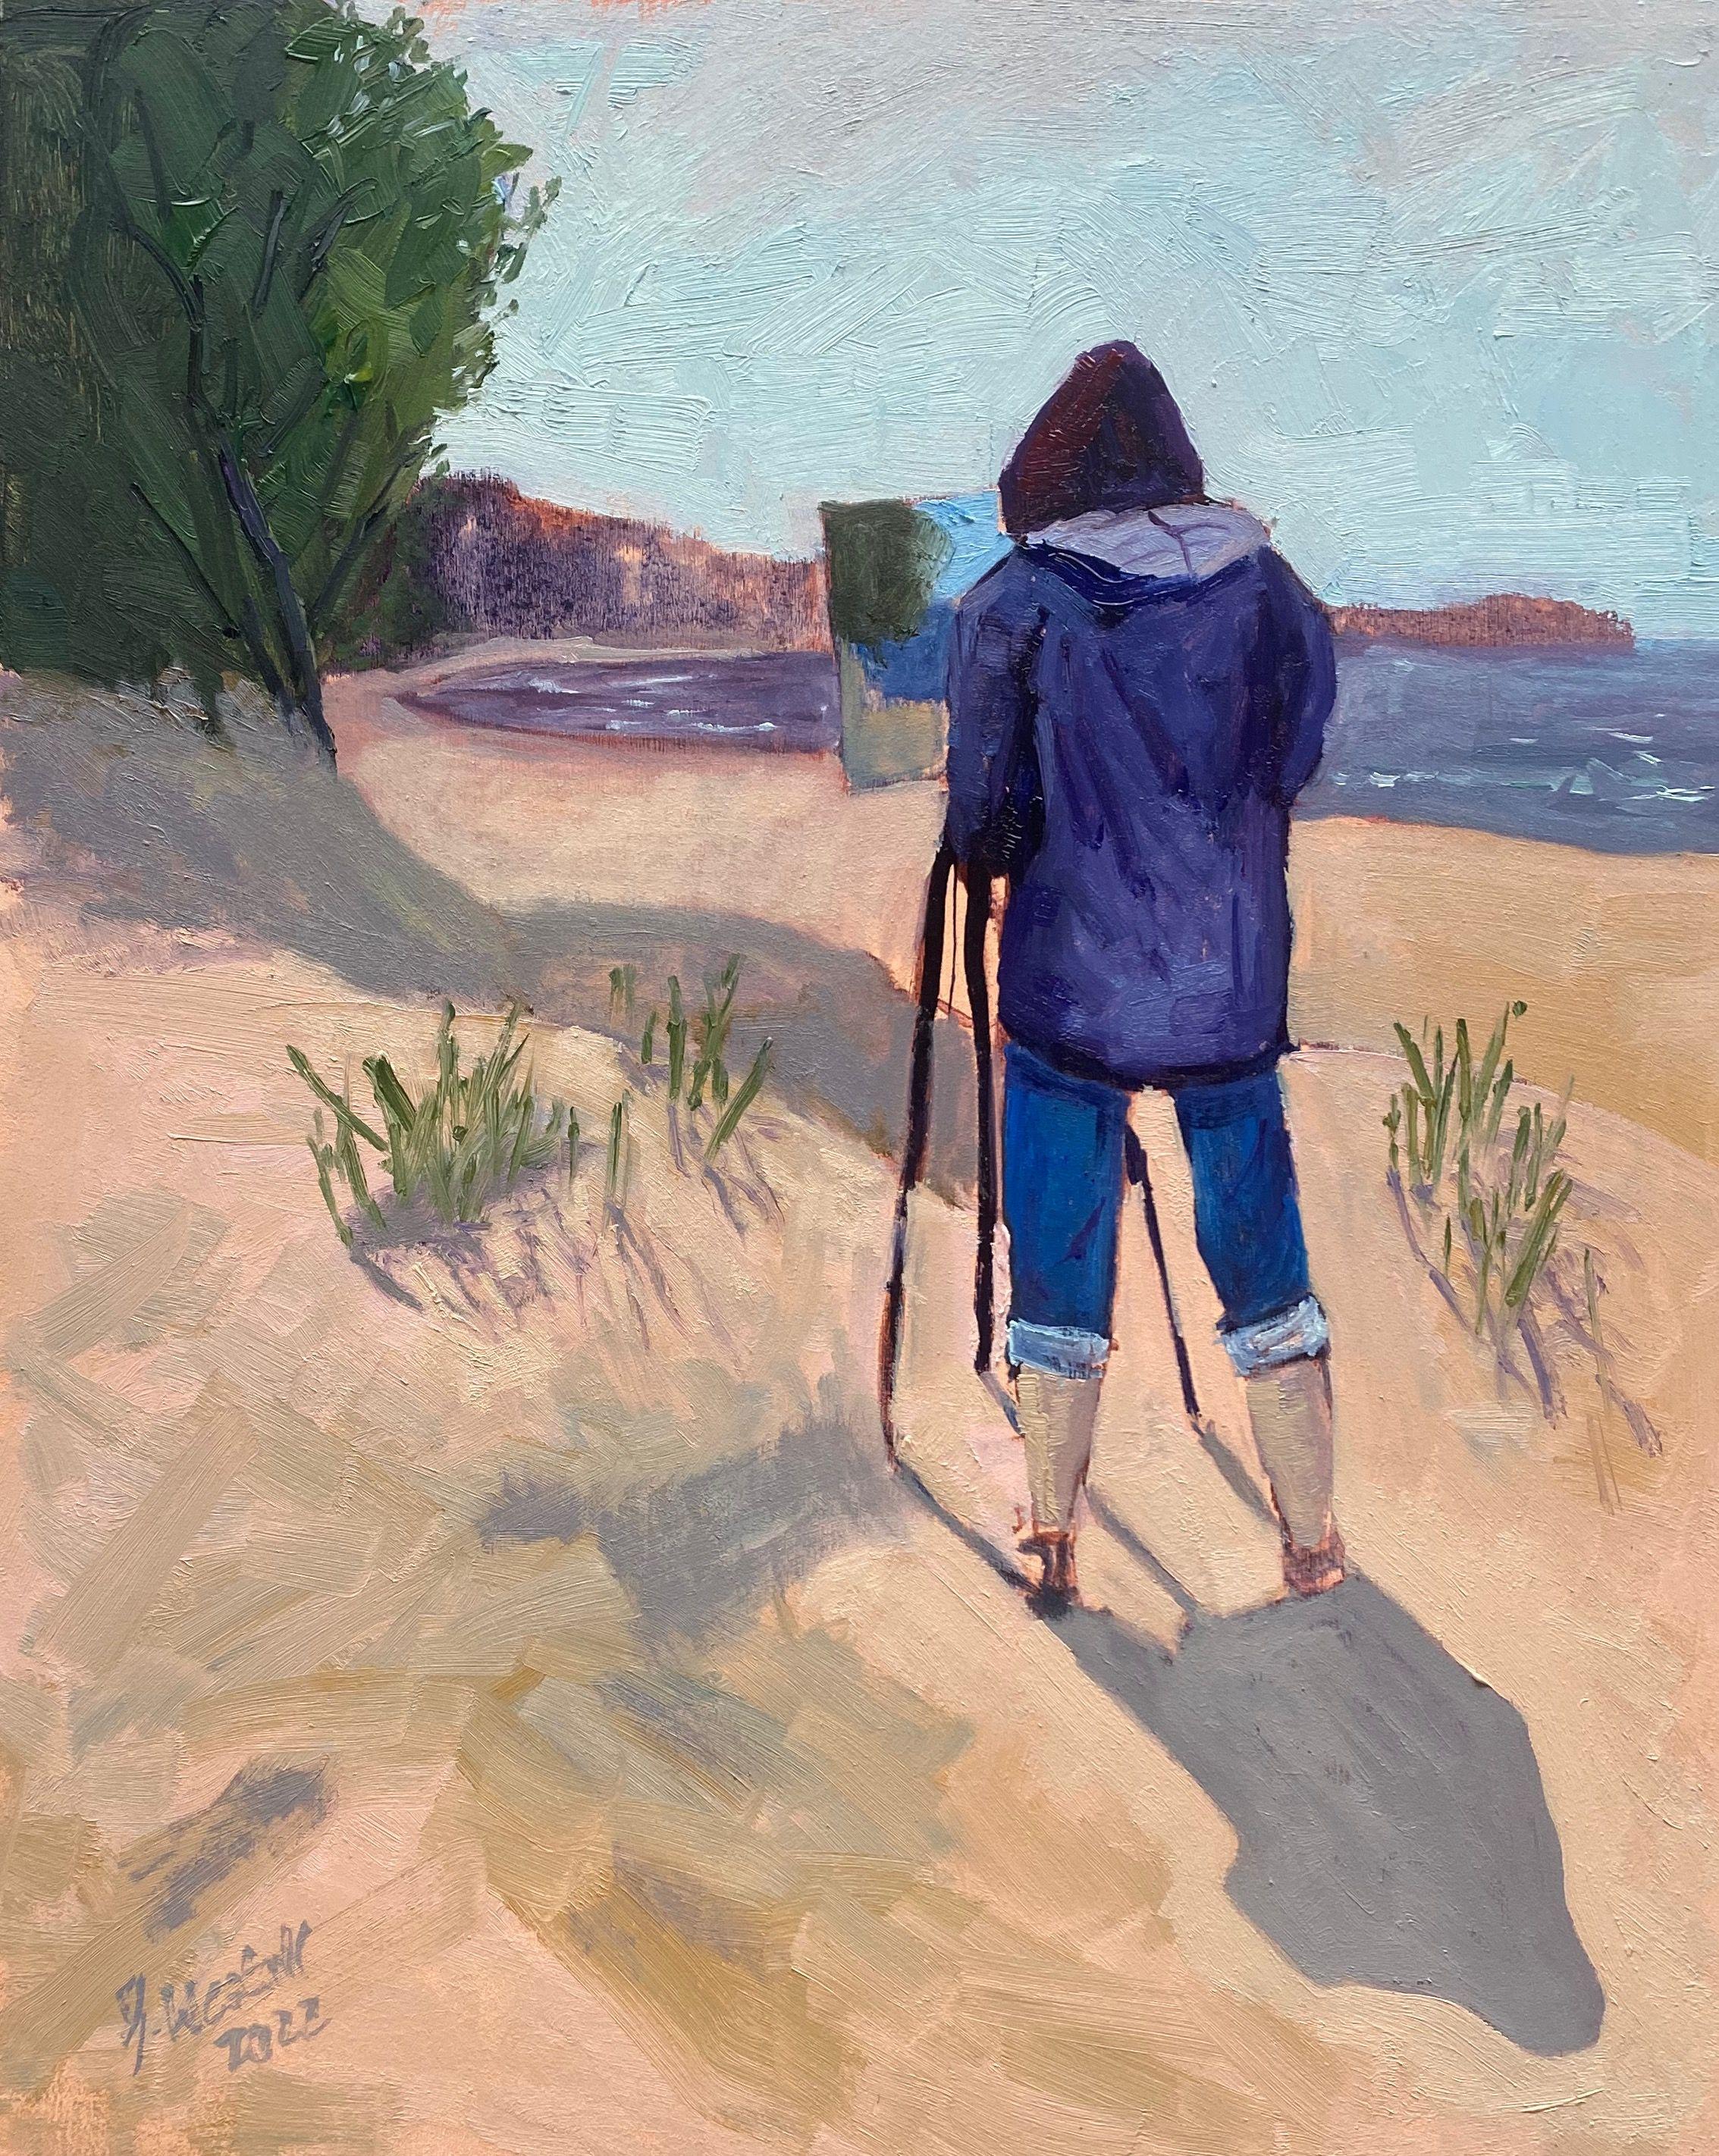 A windy and sunny day at the Baltic Sea. The wind was cold, that without a jacket, it was almost impossible to paint without freezing. My fellow painter didn't have a warm jacket with her, so I lent her my spare jacket, hence the title "Rescue